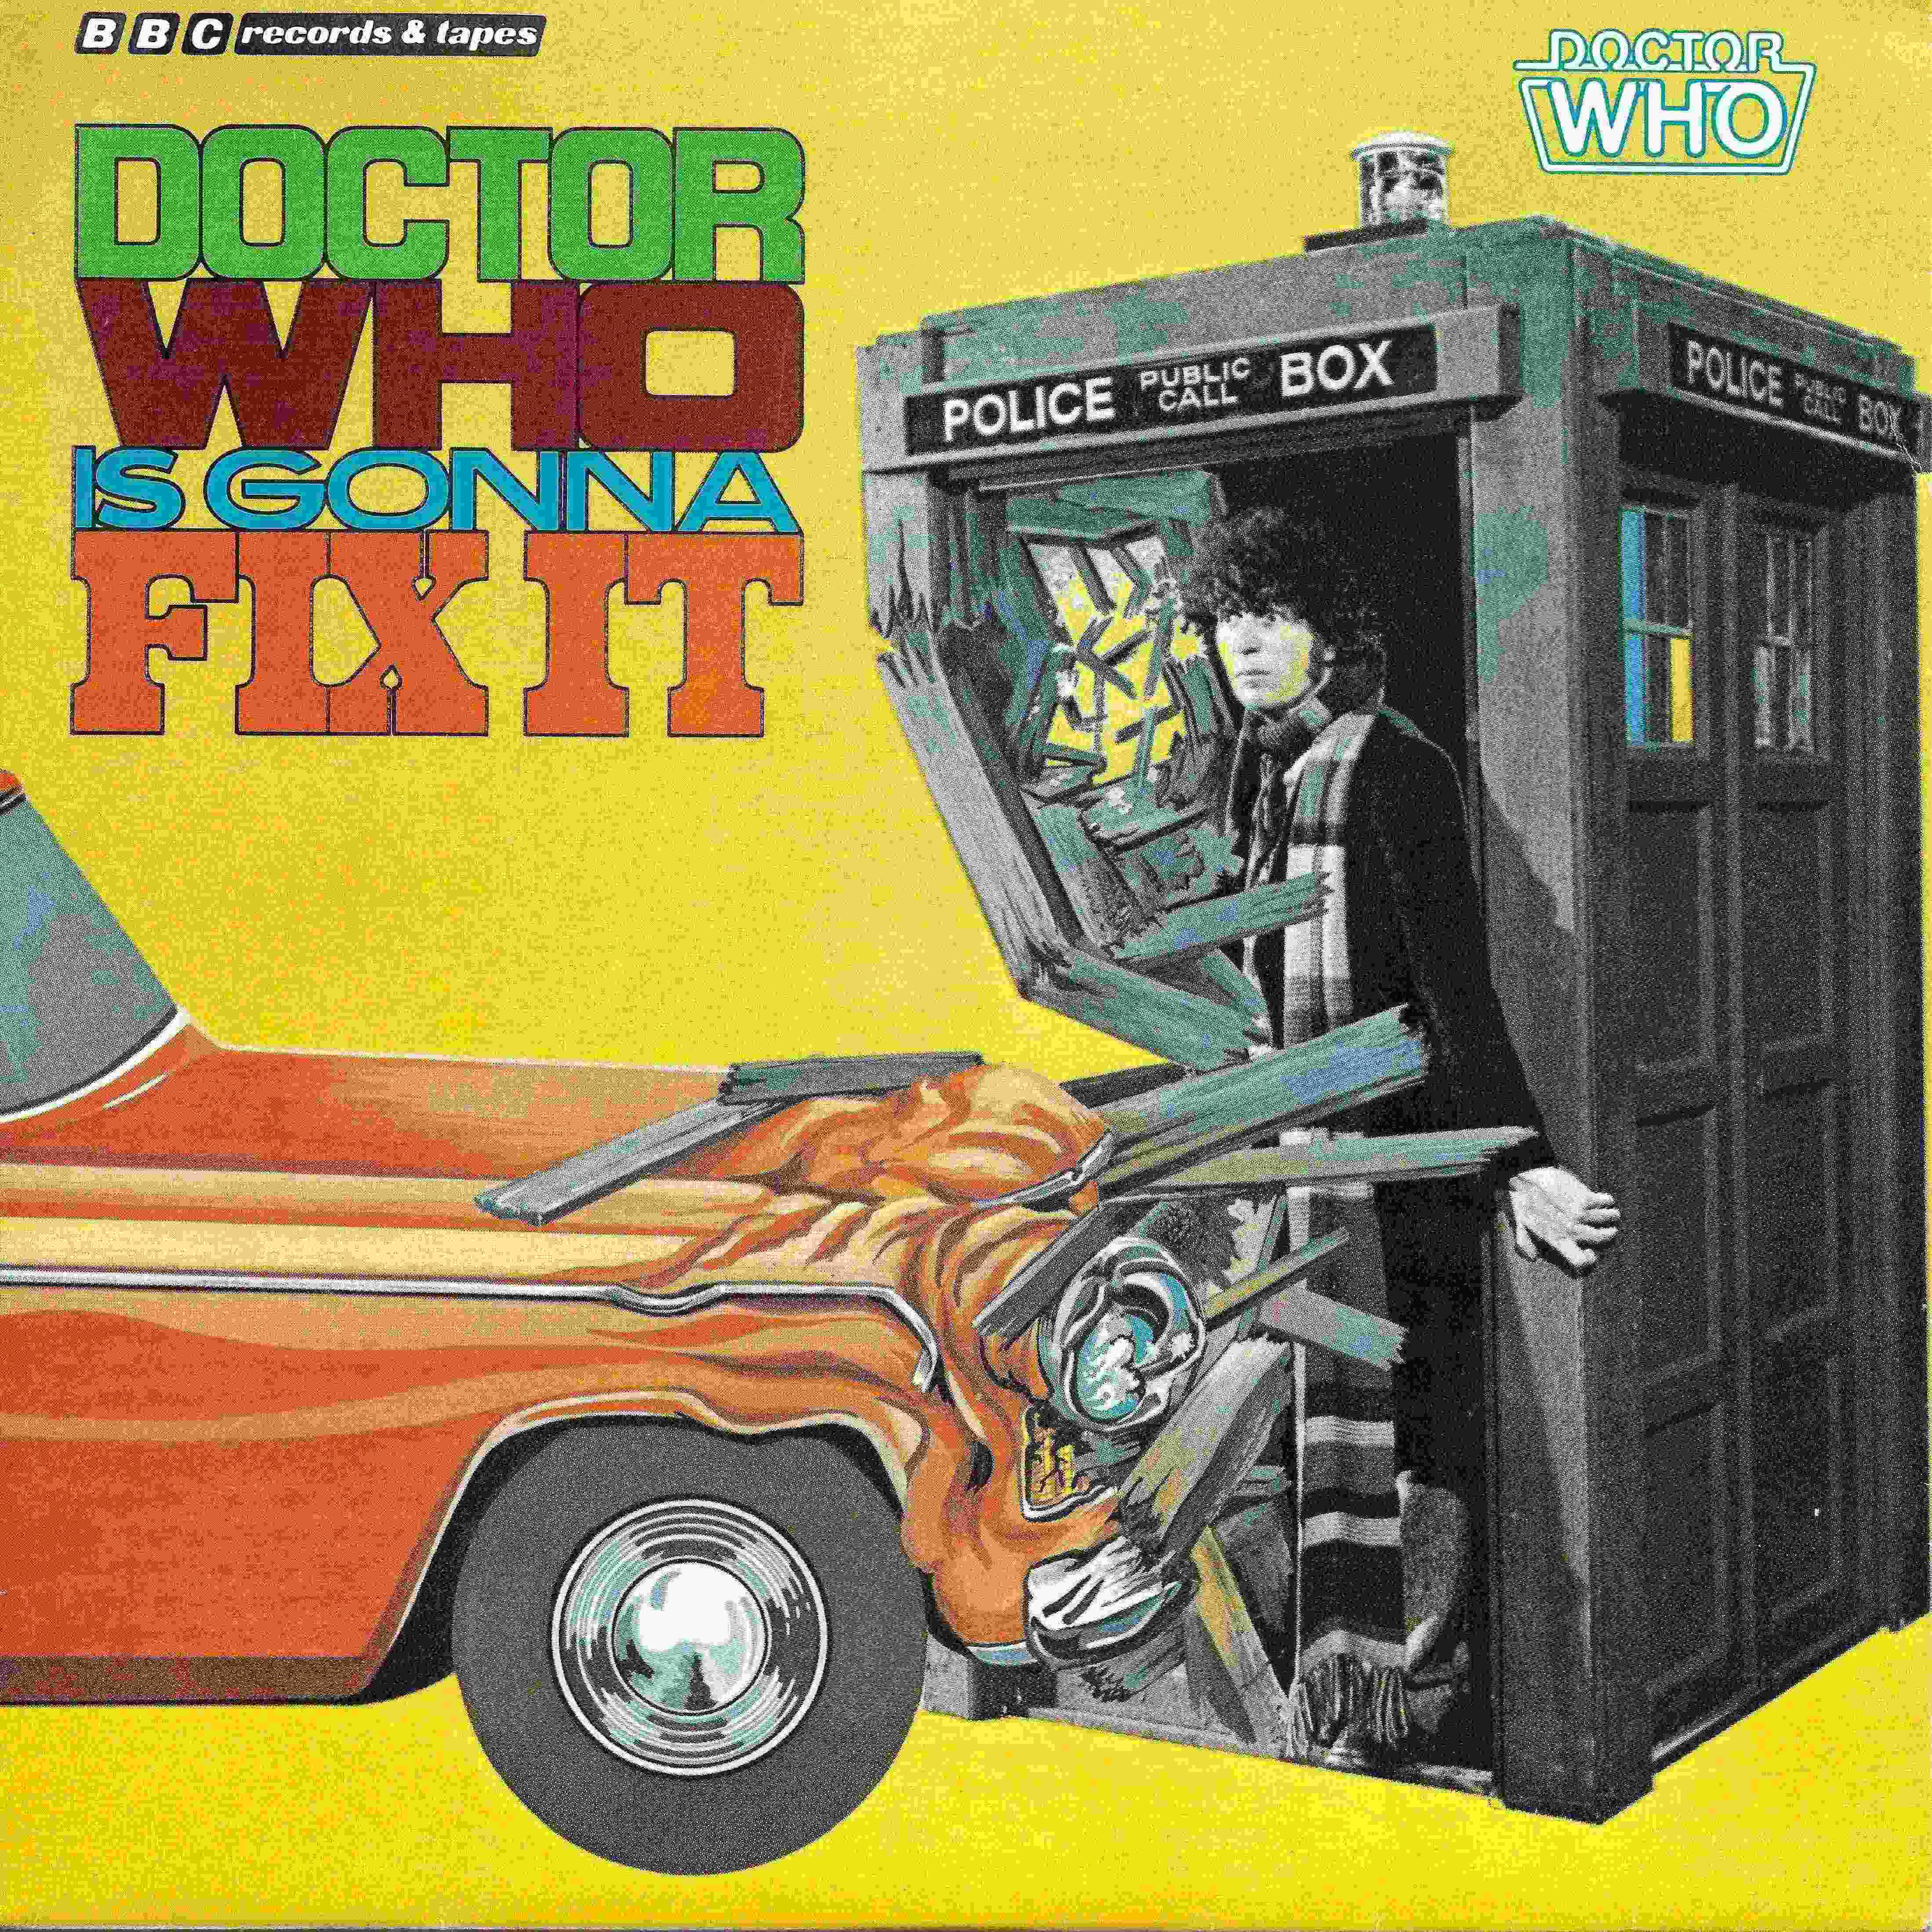 Picture of BBC - 454 Doctor who is gonna fix it by artist Bullamakanka from the BBC records and Tapes library